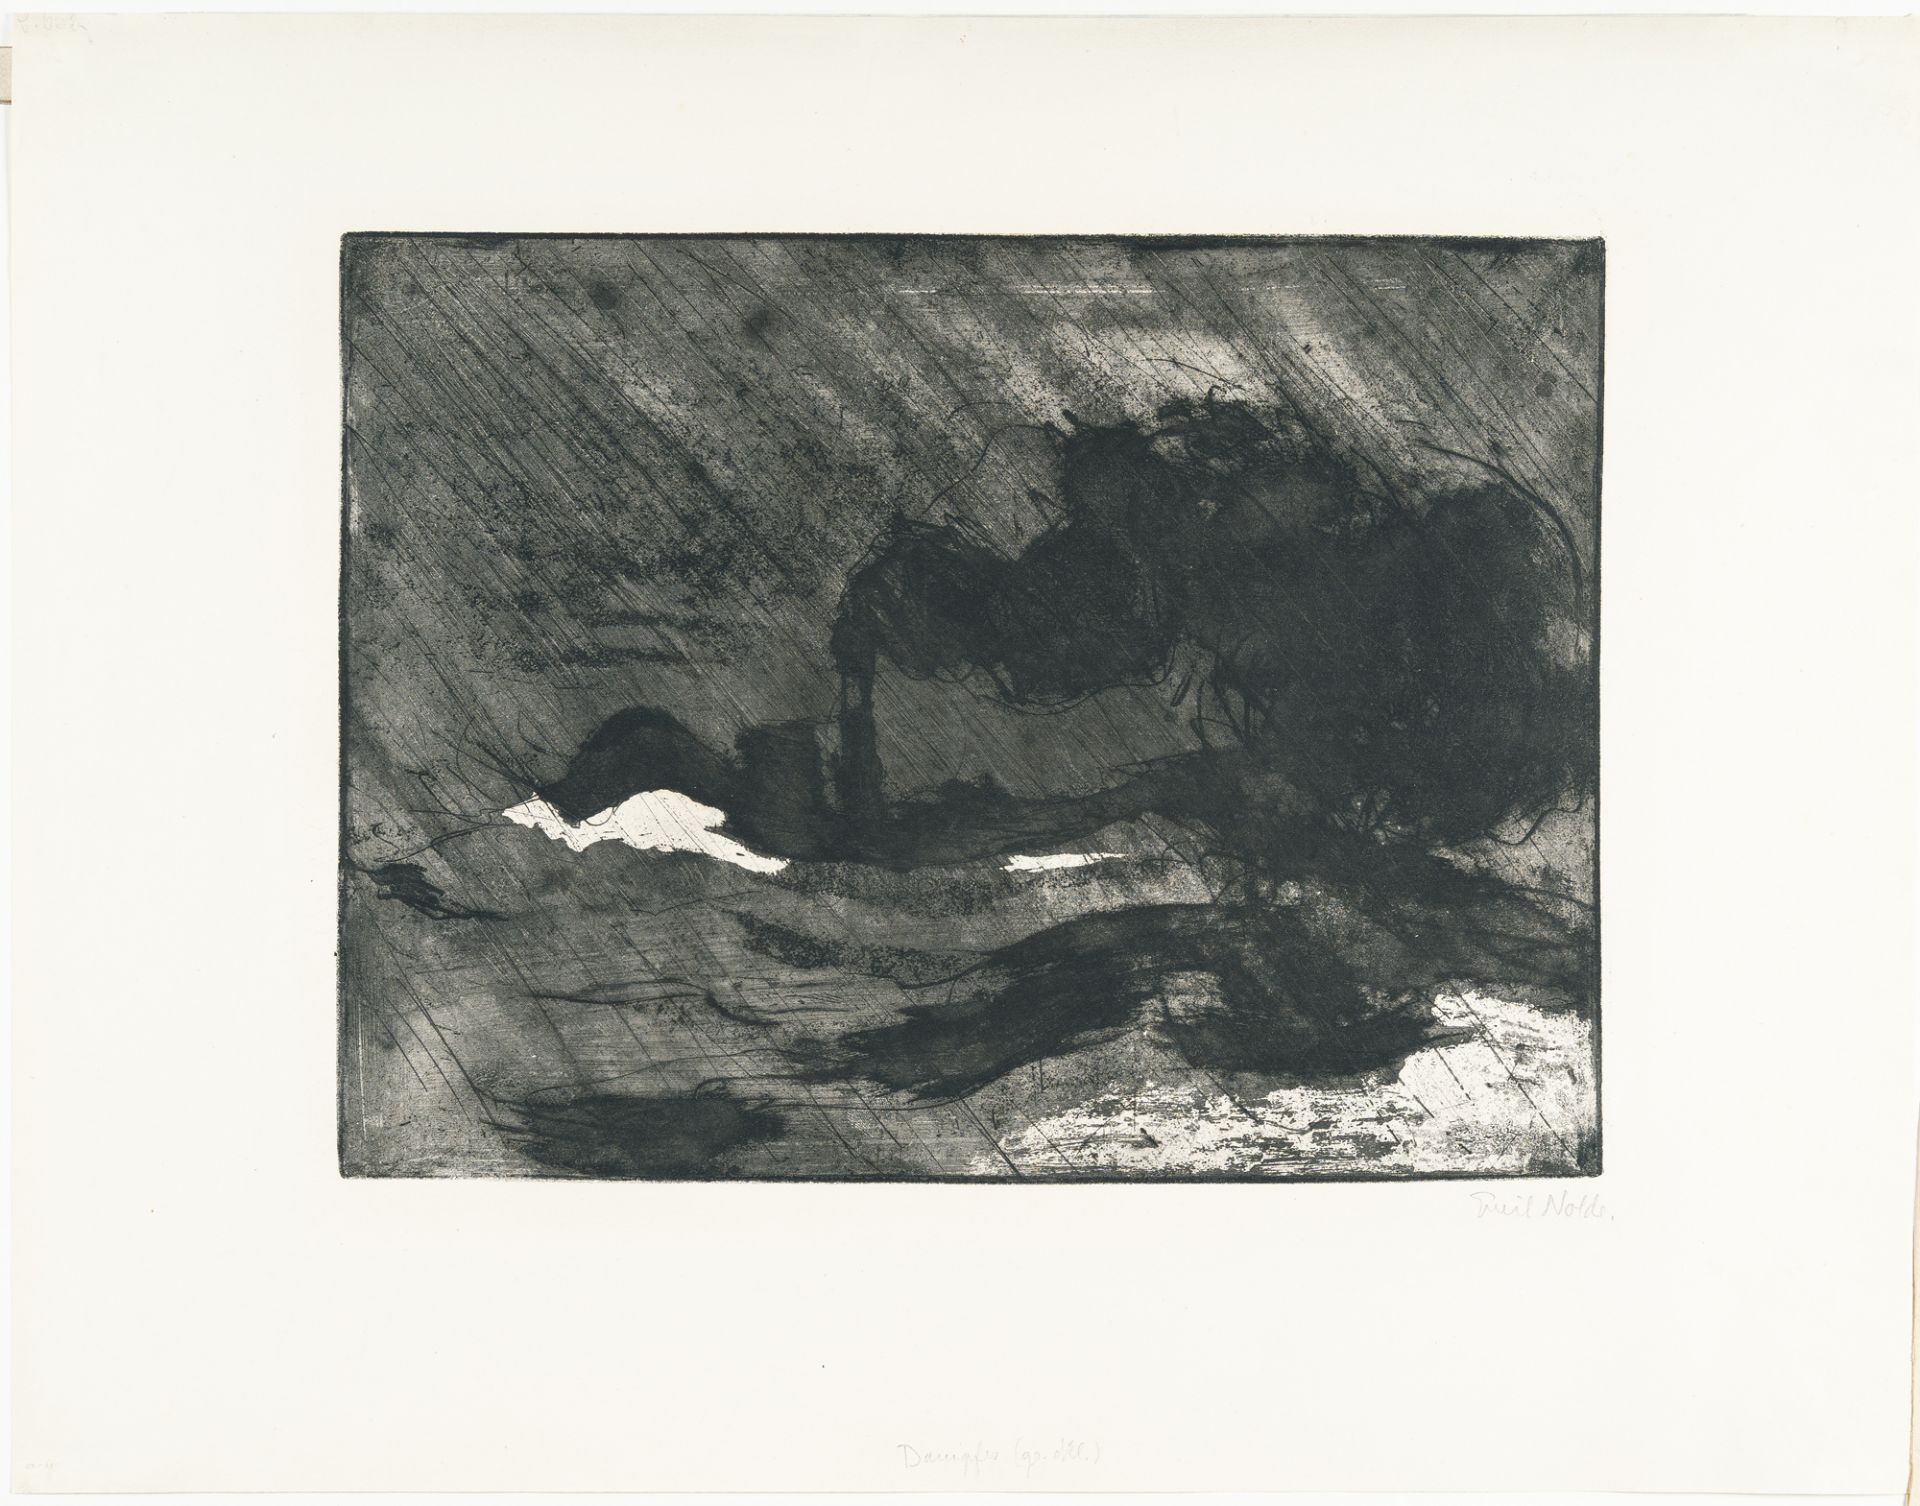 Emil Nolde (1867 Nolde - Seebüll 1956), “Steam ship (gr. Dkl.)”Etching with aquatint and tone - Image 2 of 4